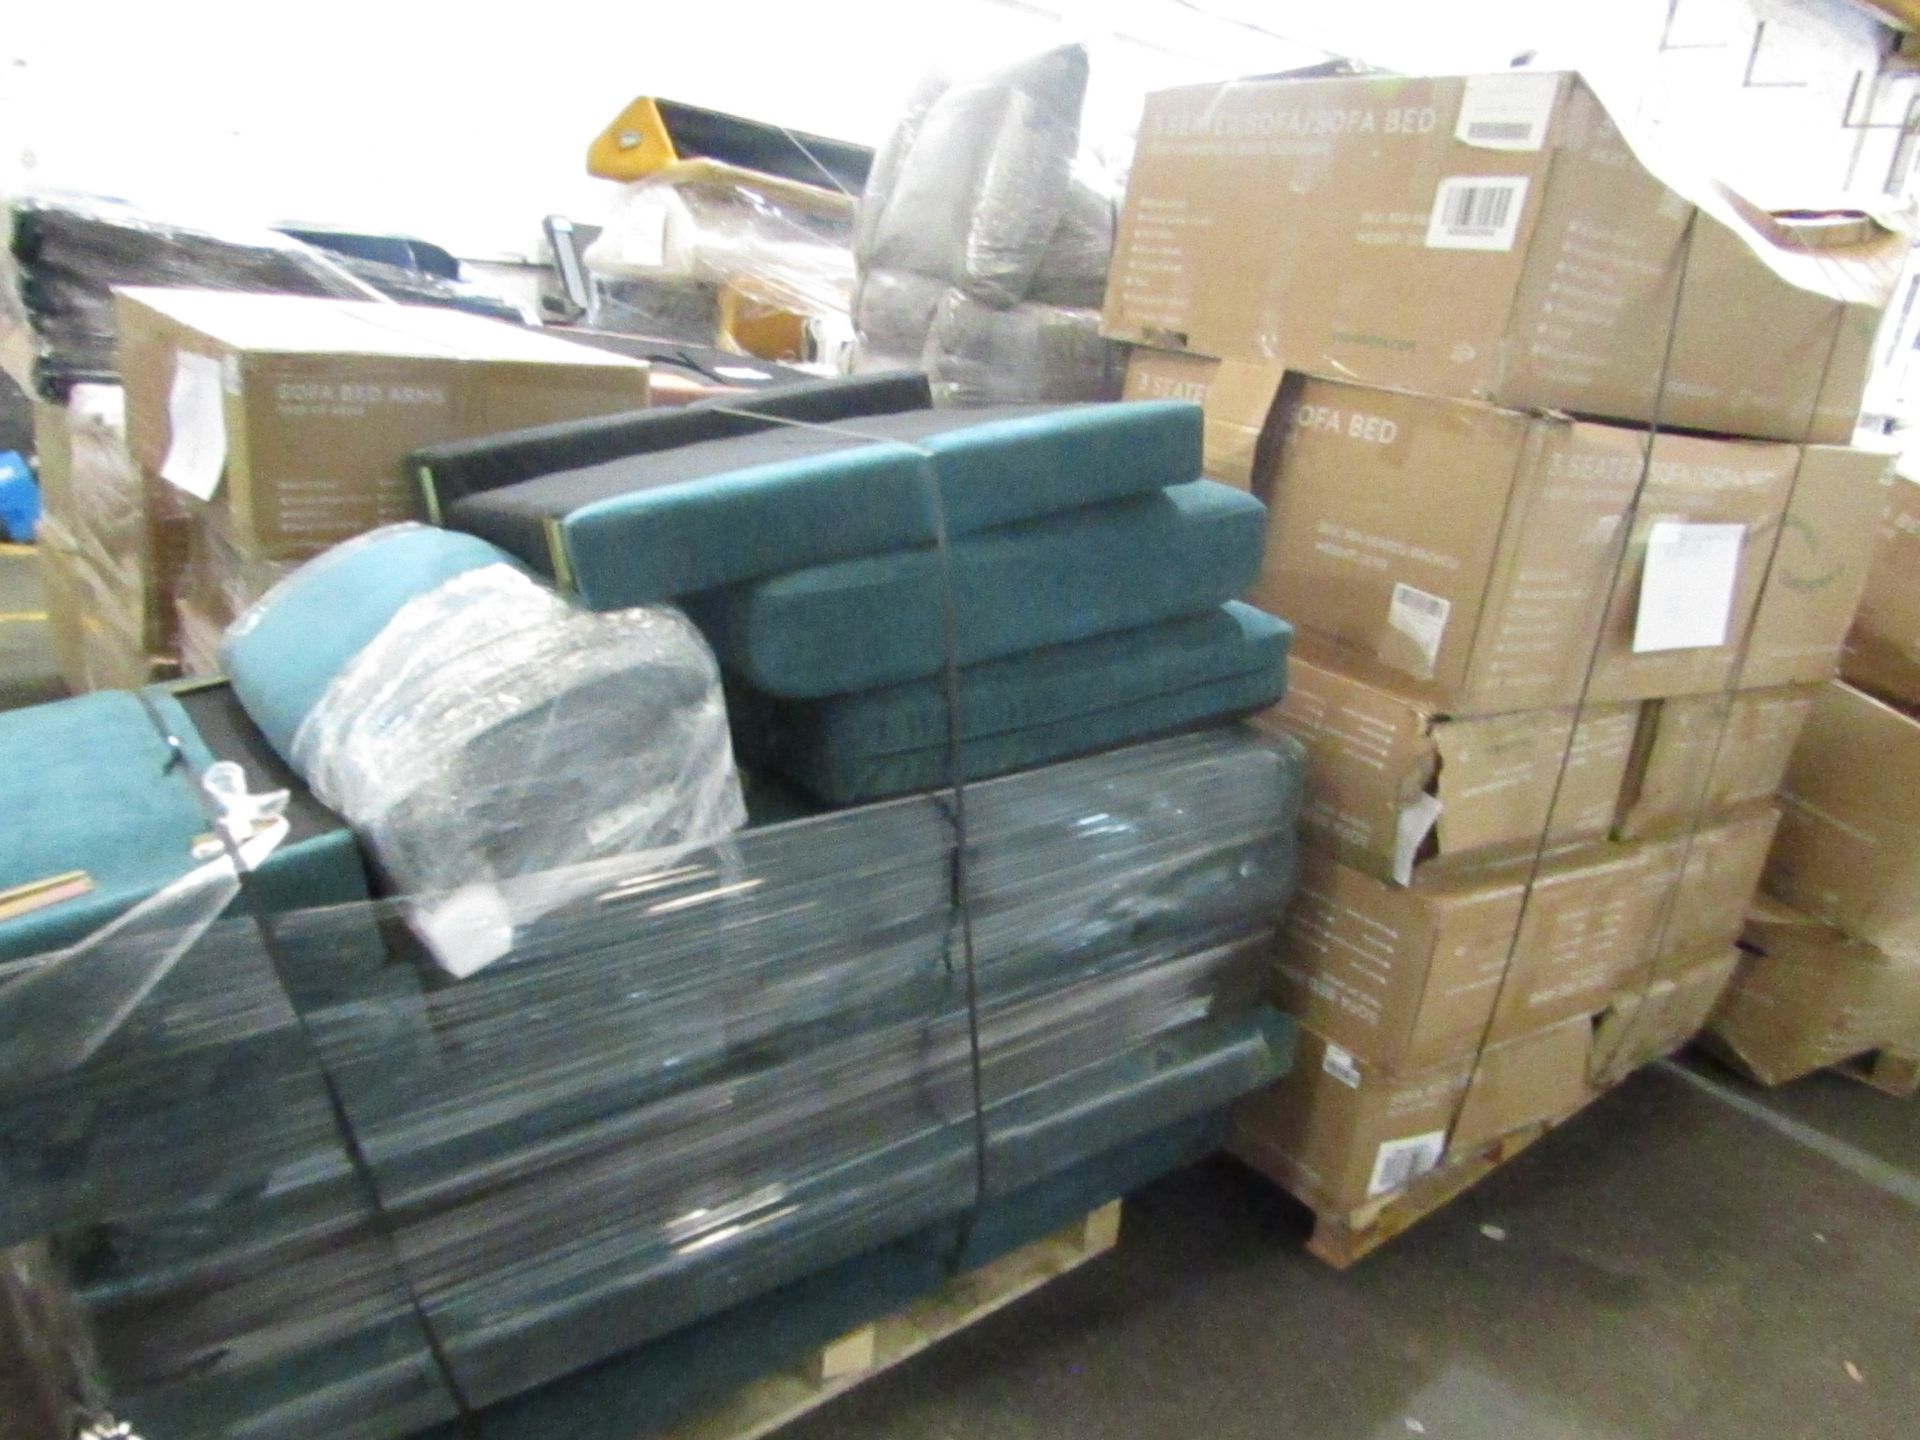 10% Buyers Premium +VAT, 24 Pallets of Genuine SNUG SOFA parts - Mixed Lots of Bases Backs Arms - Image 15 of 20